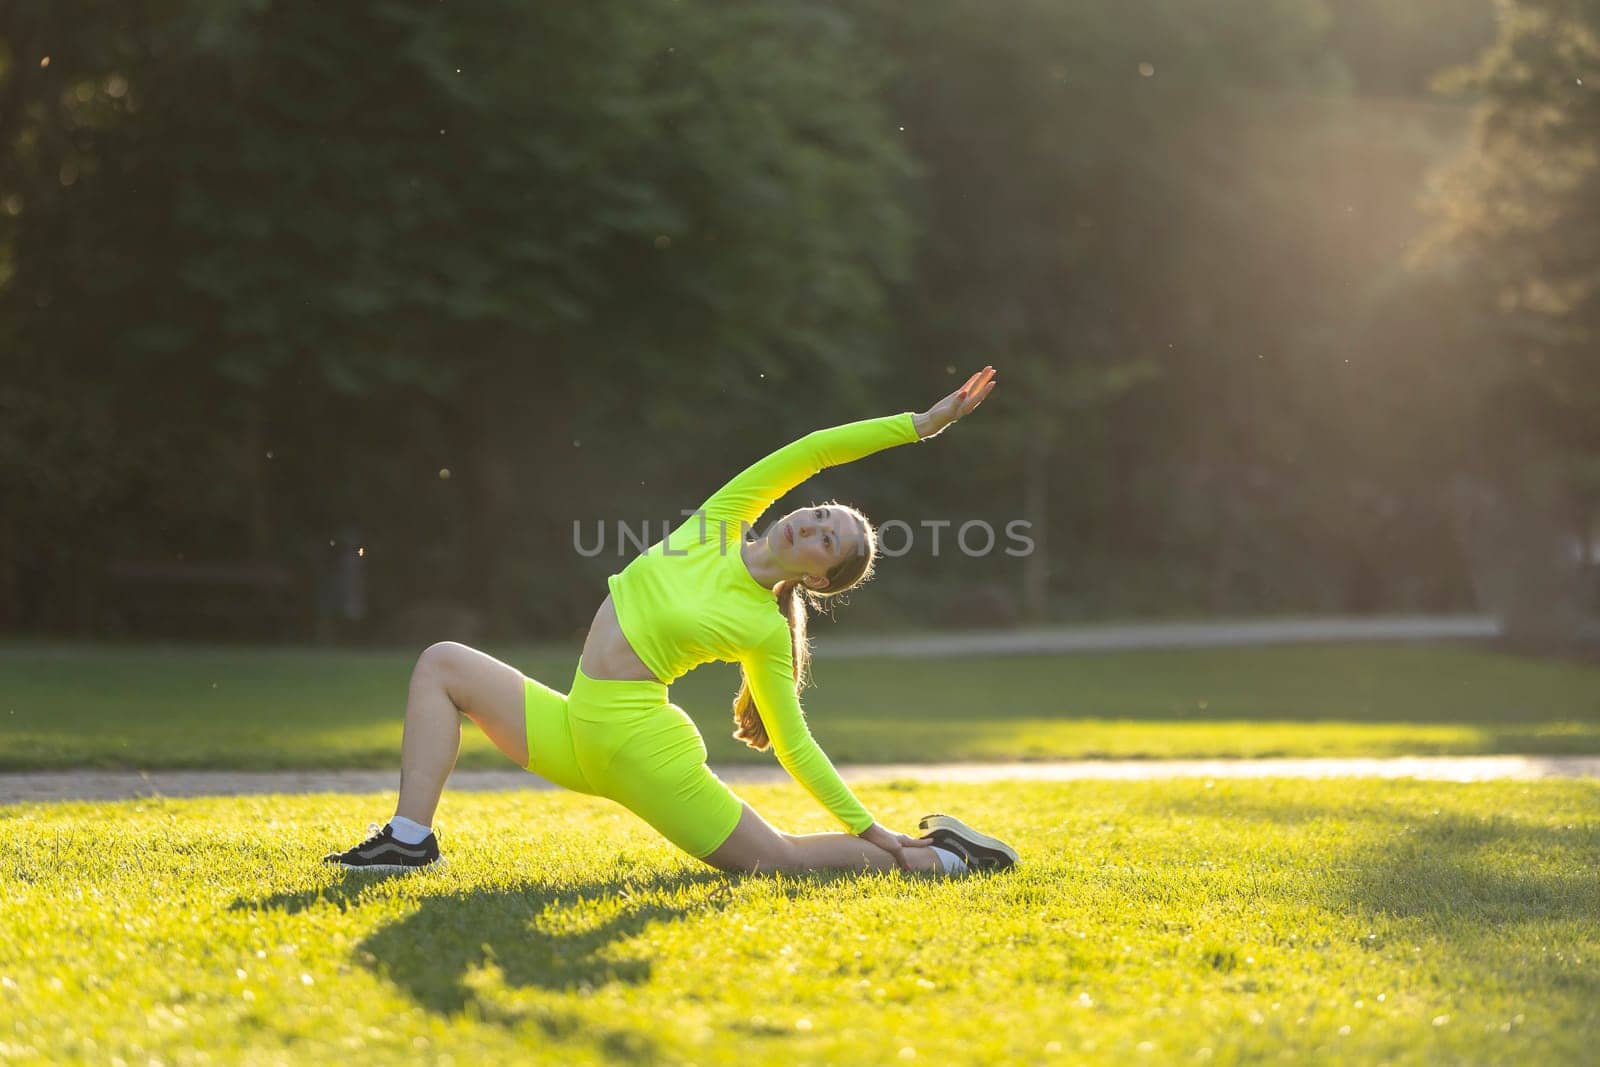 A woman in a neon green top and shorts is doing a yoga pose on a grassy field, sunset